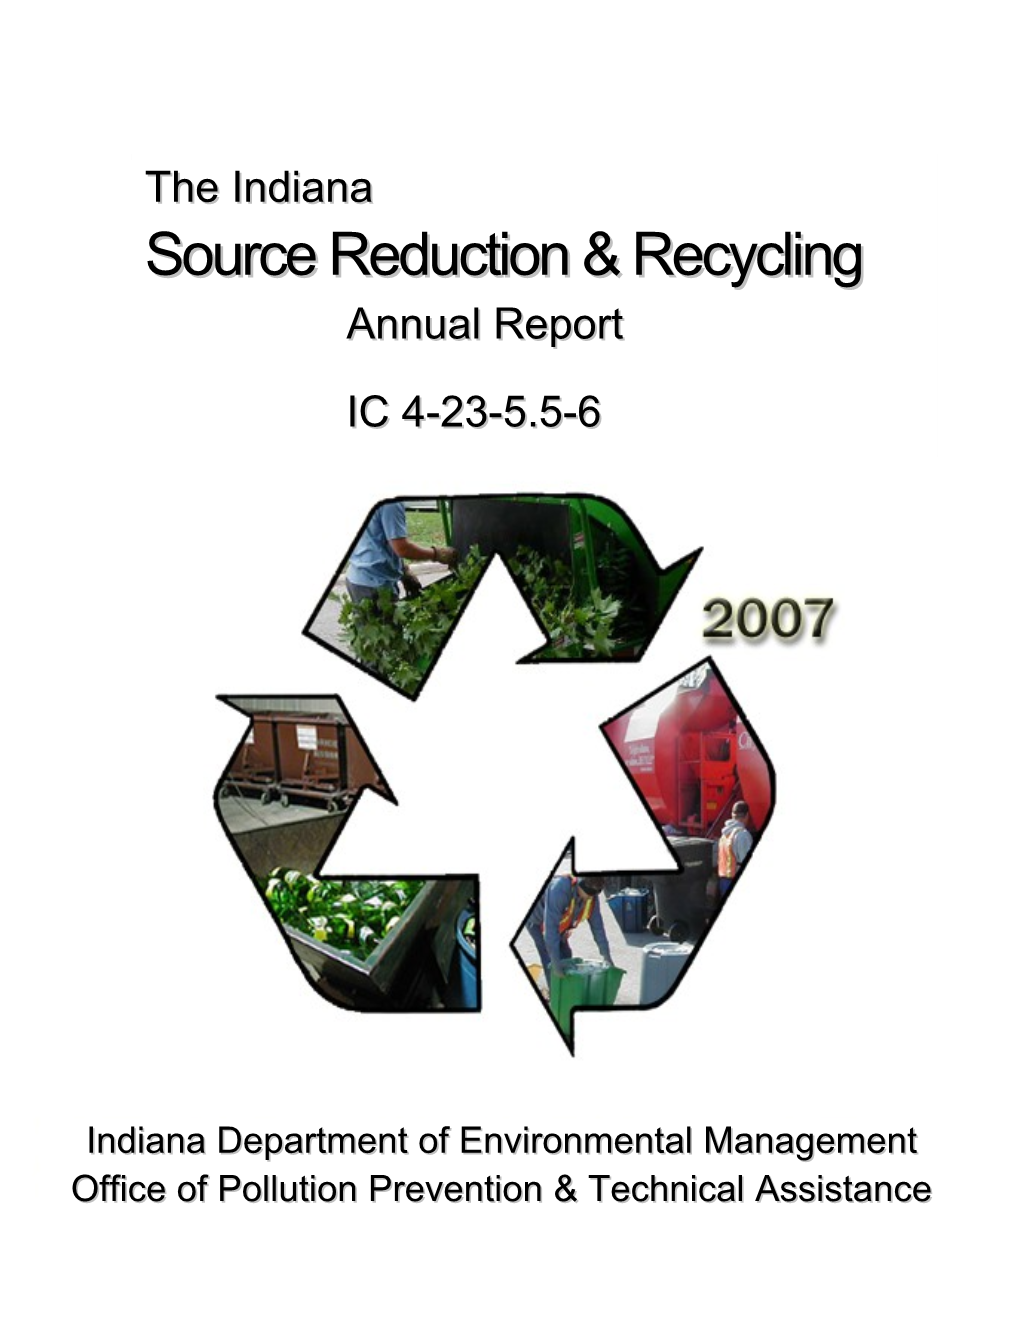 The Source Reduction and Recycling (SR&R) Branch Mission Is to Provide Technical Assistance